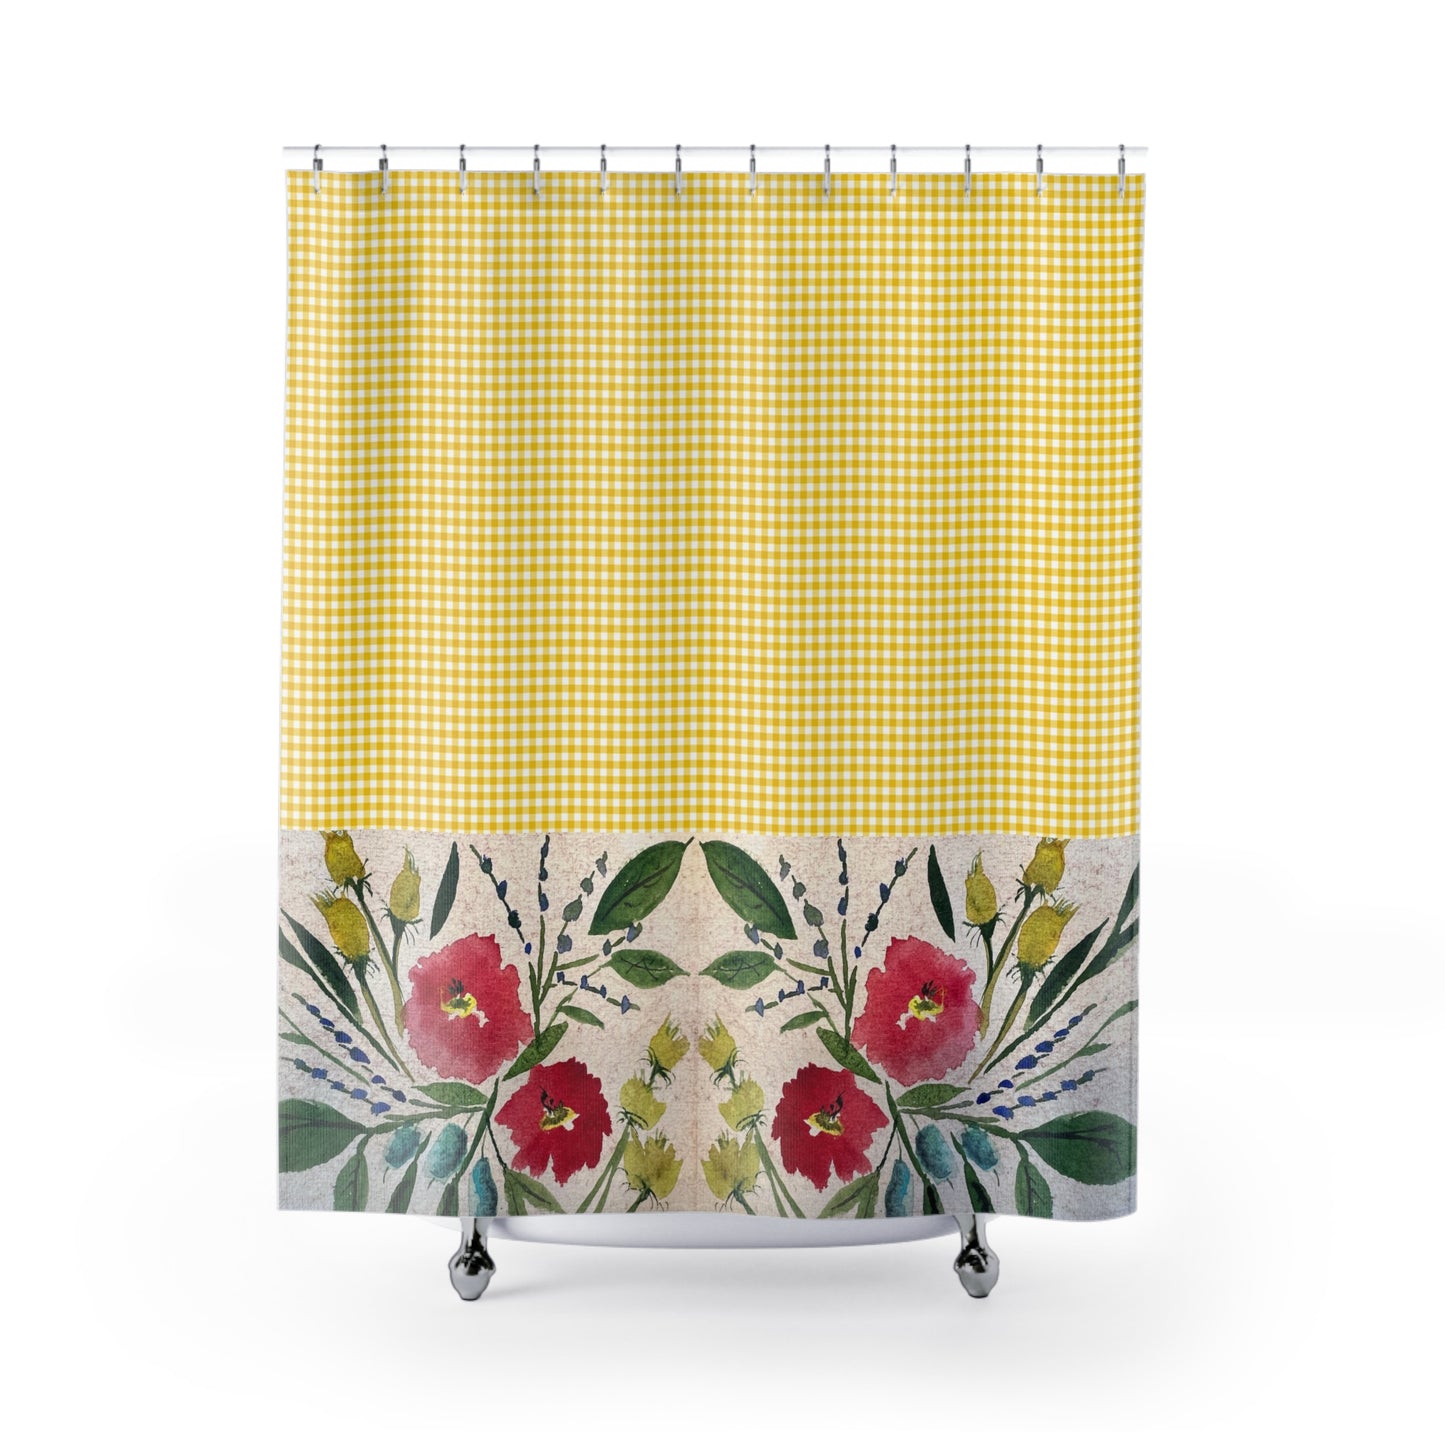 The Cottage Shower Curtain